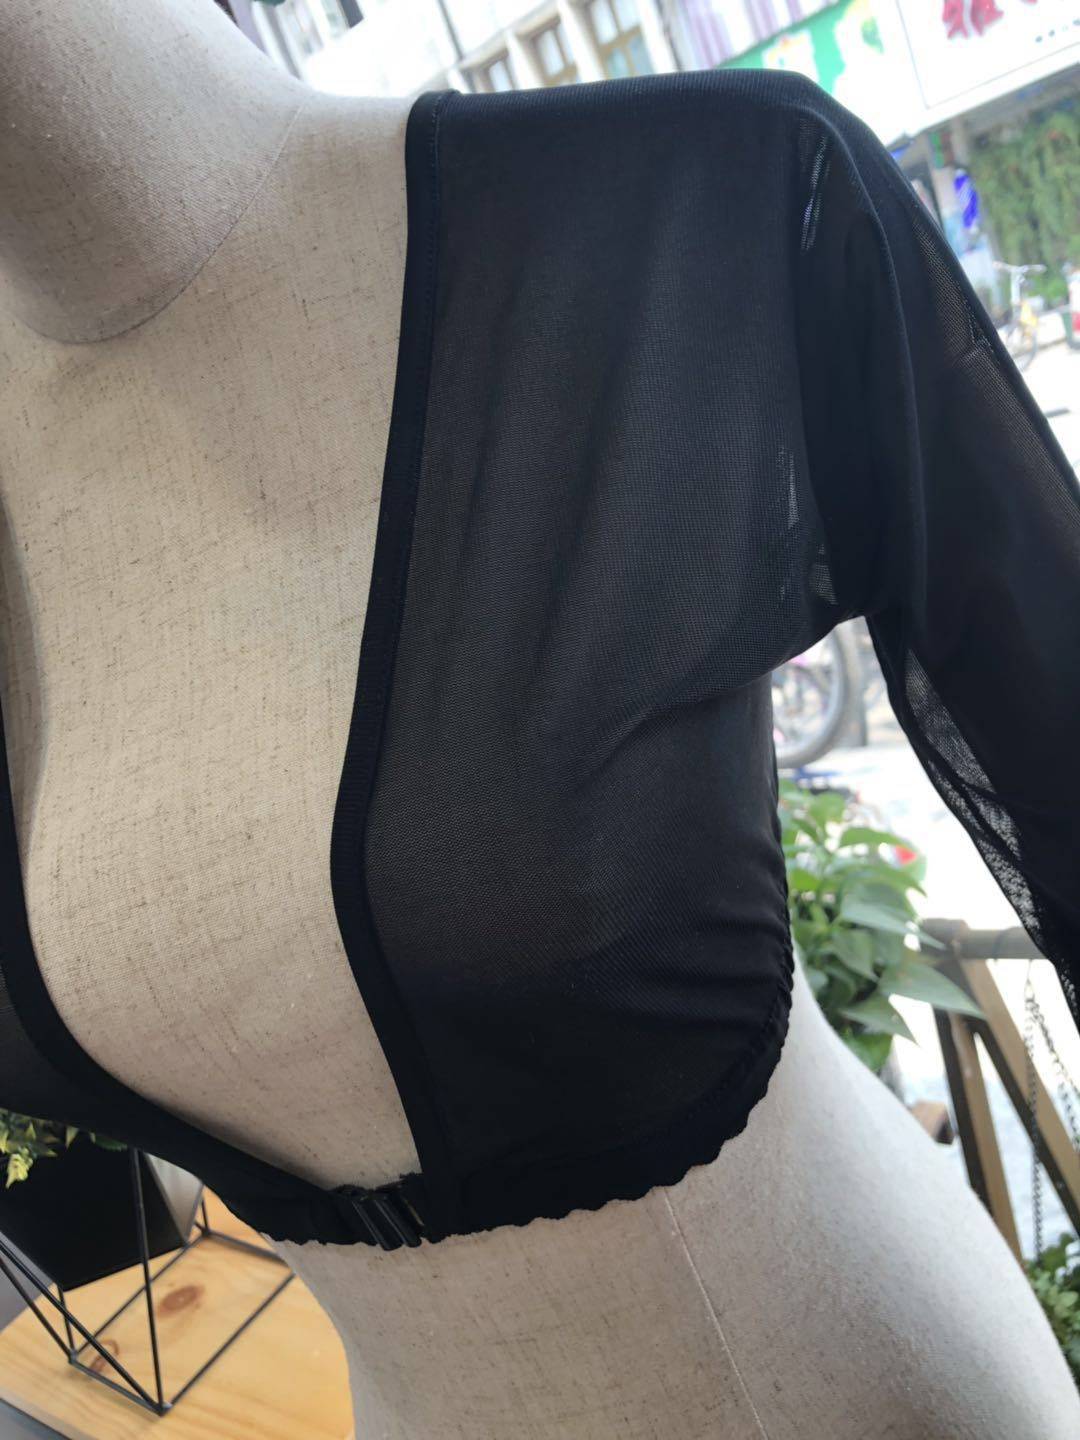 Long Sleeve Mesh Shaping Top - Women’s Clothing & Accessories - Shirts & Tops - 9 - 2024